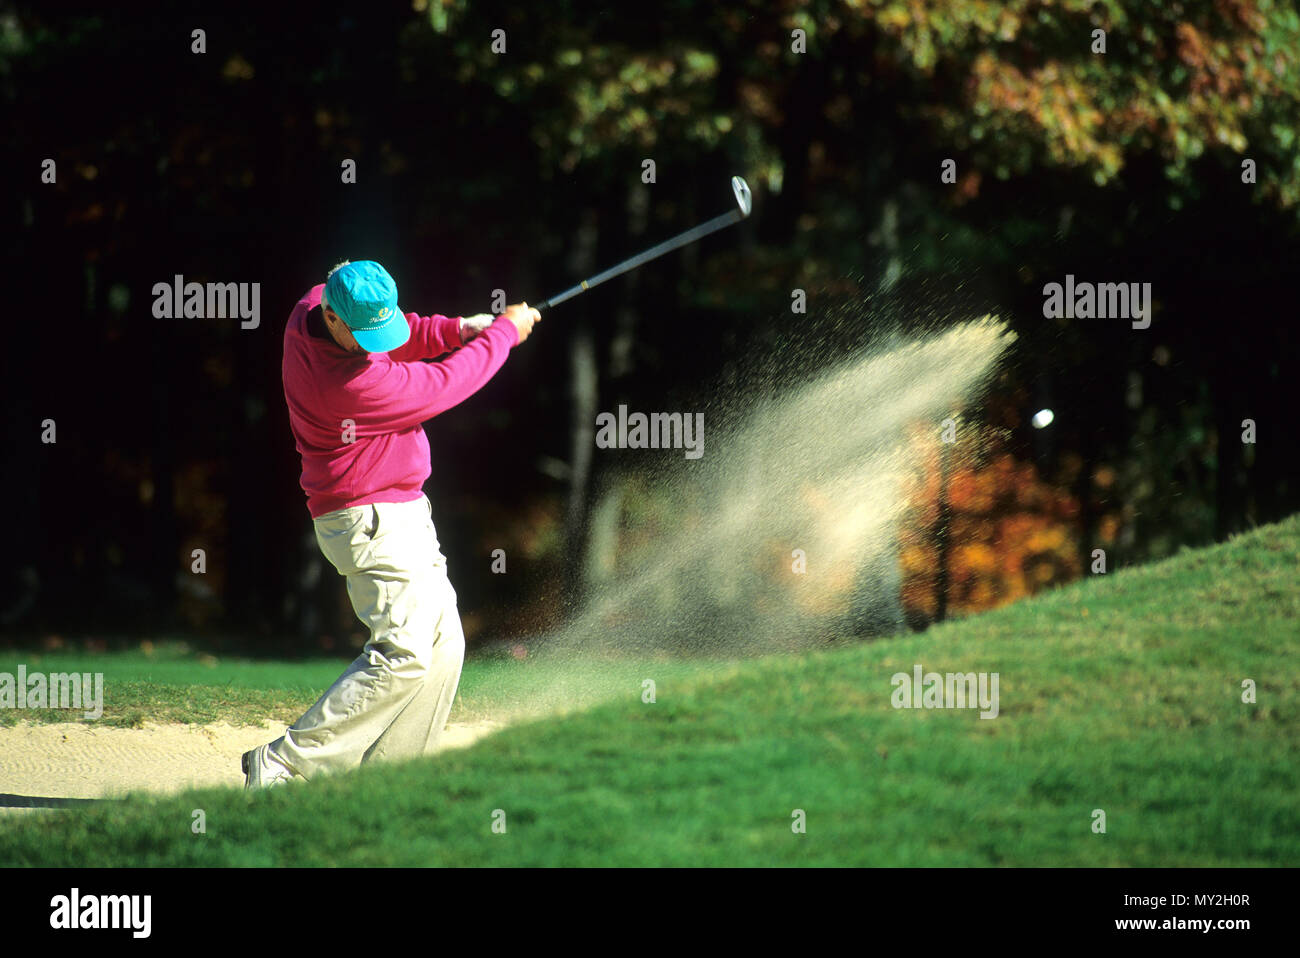 A golfer blasts out of a sand trap in Foxboro, Massachusetts, USA Stock Photo